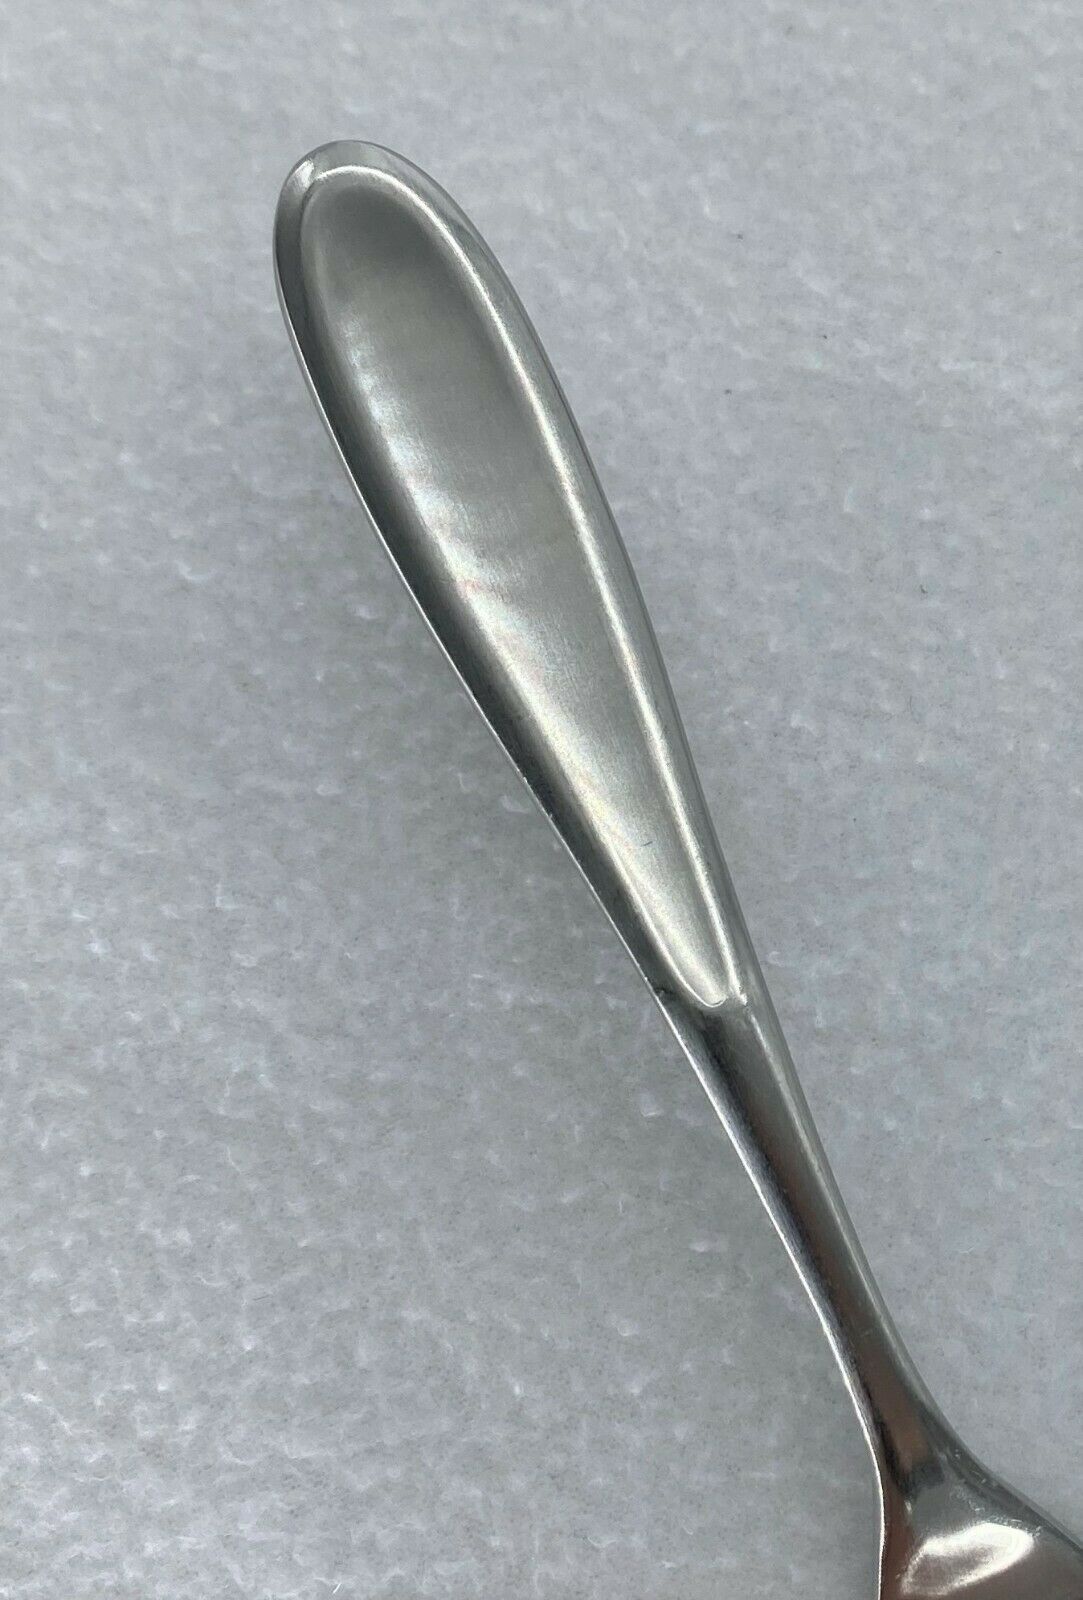 Primary image for Retroneau Contour 18/10  Dinner Fork 7 5/8" Stainless Flatware-3 Available Satin